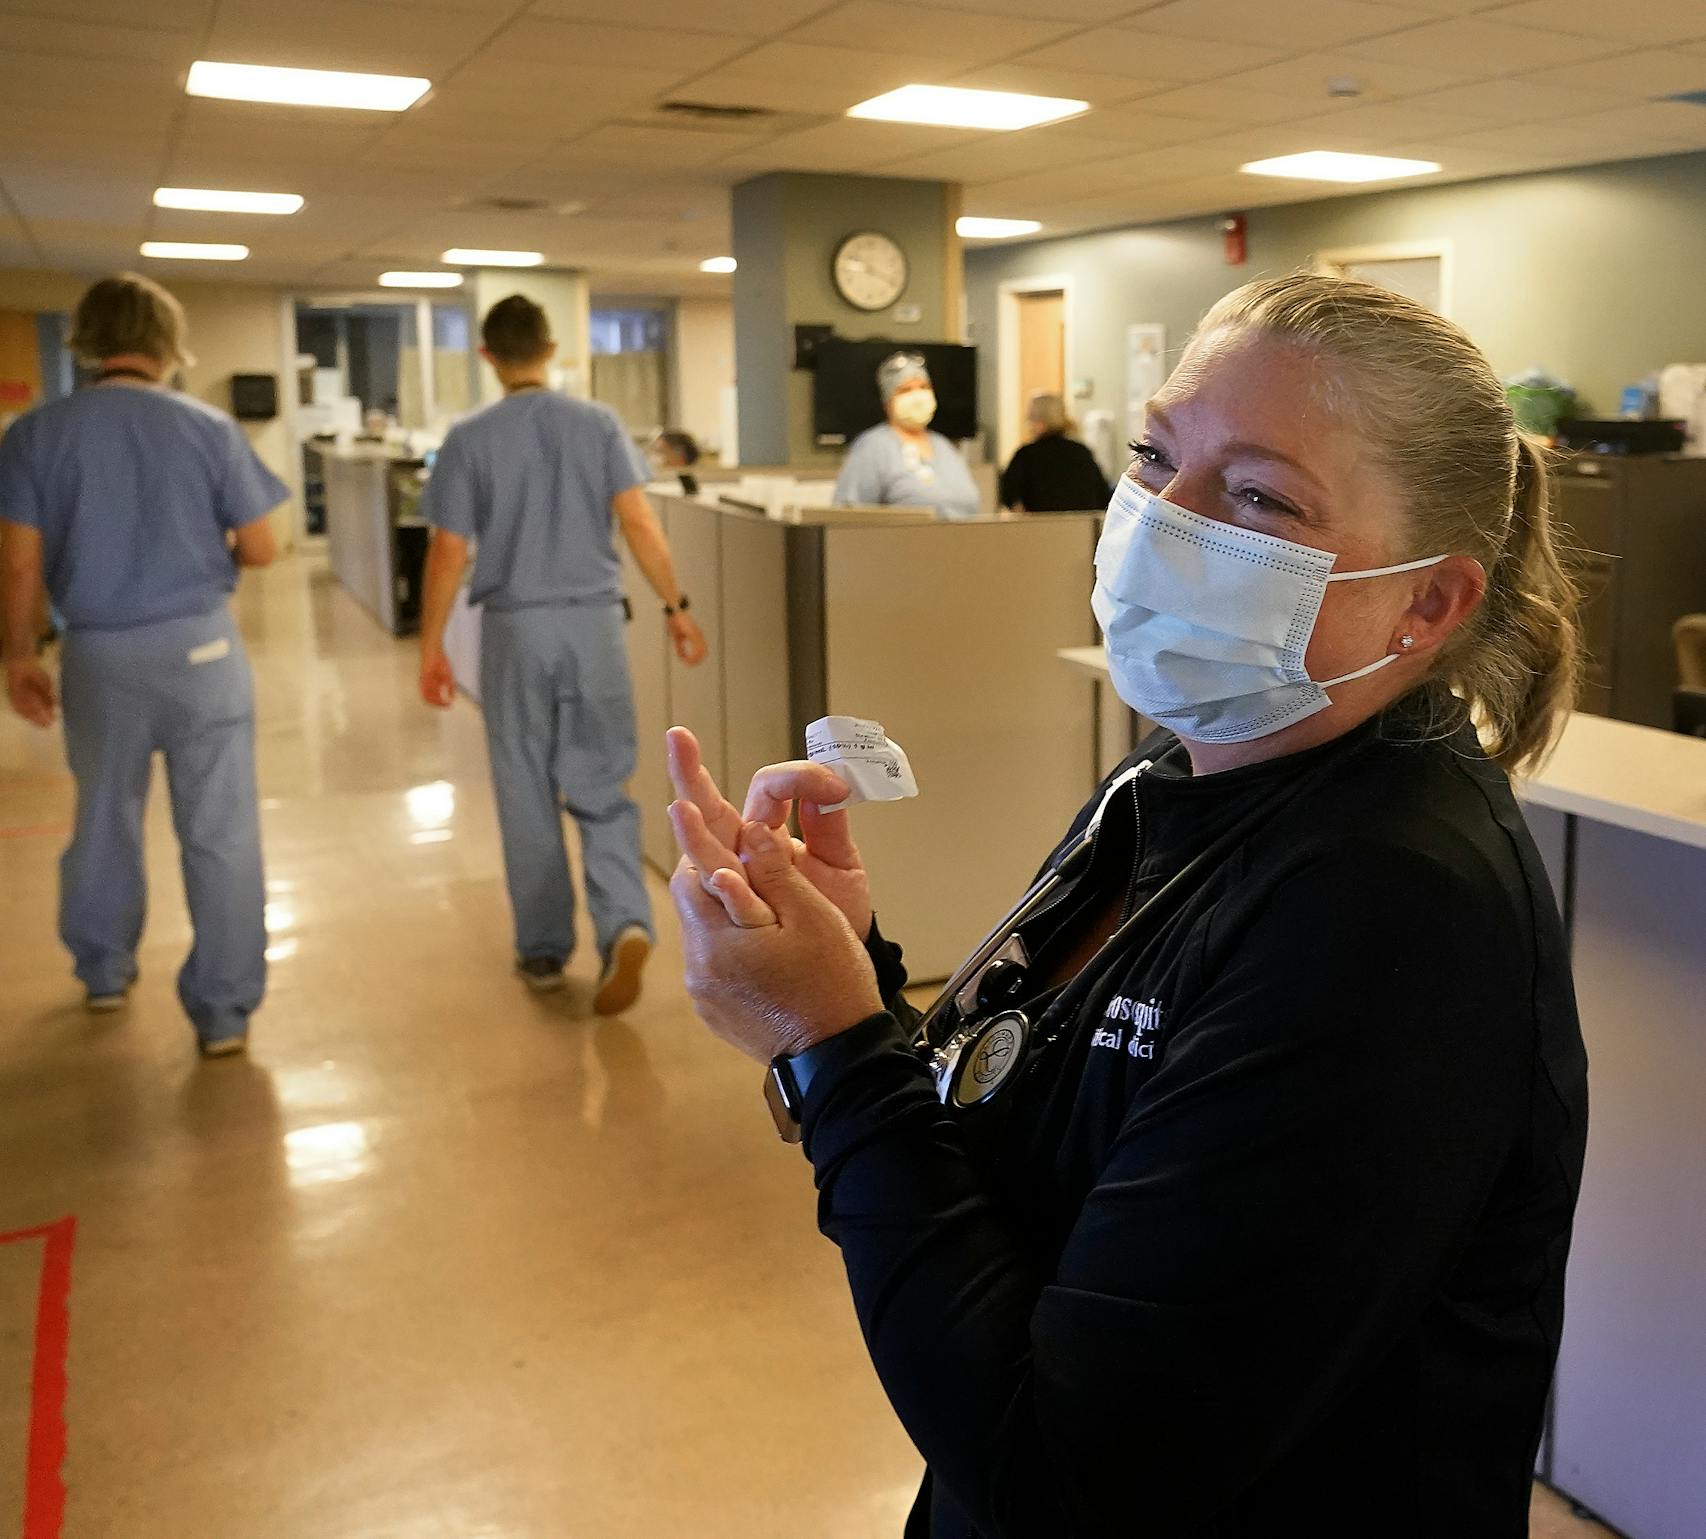 Nurse Laura Triplett transferred back to cardiac care at St. John’s Hospital in Maplewood after working with COVID patients for a year and seeing five patients die of the disease in two days.